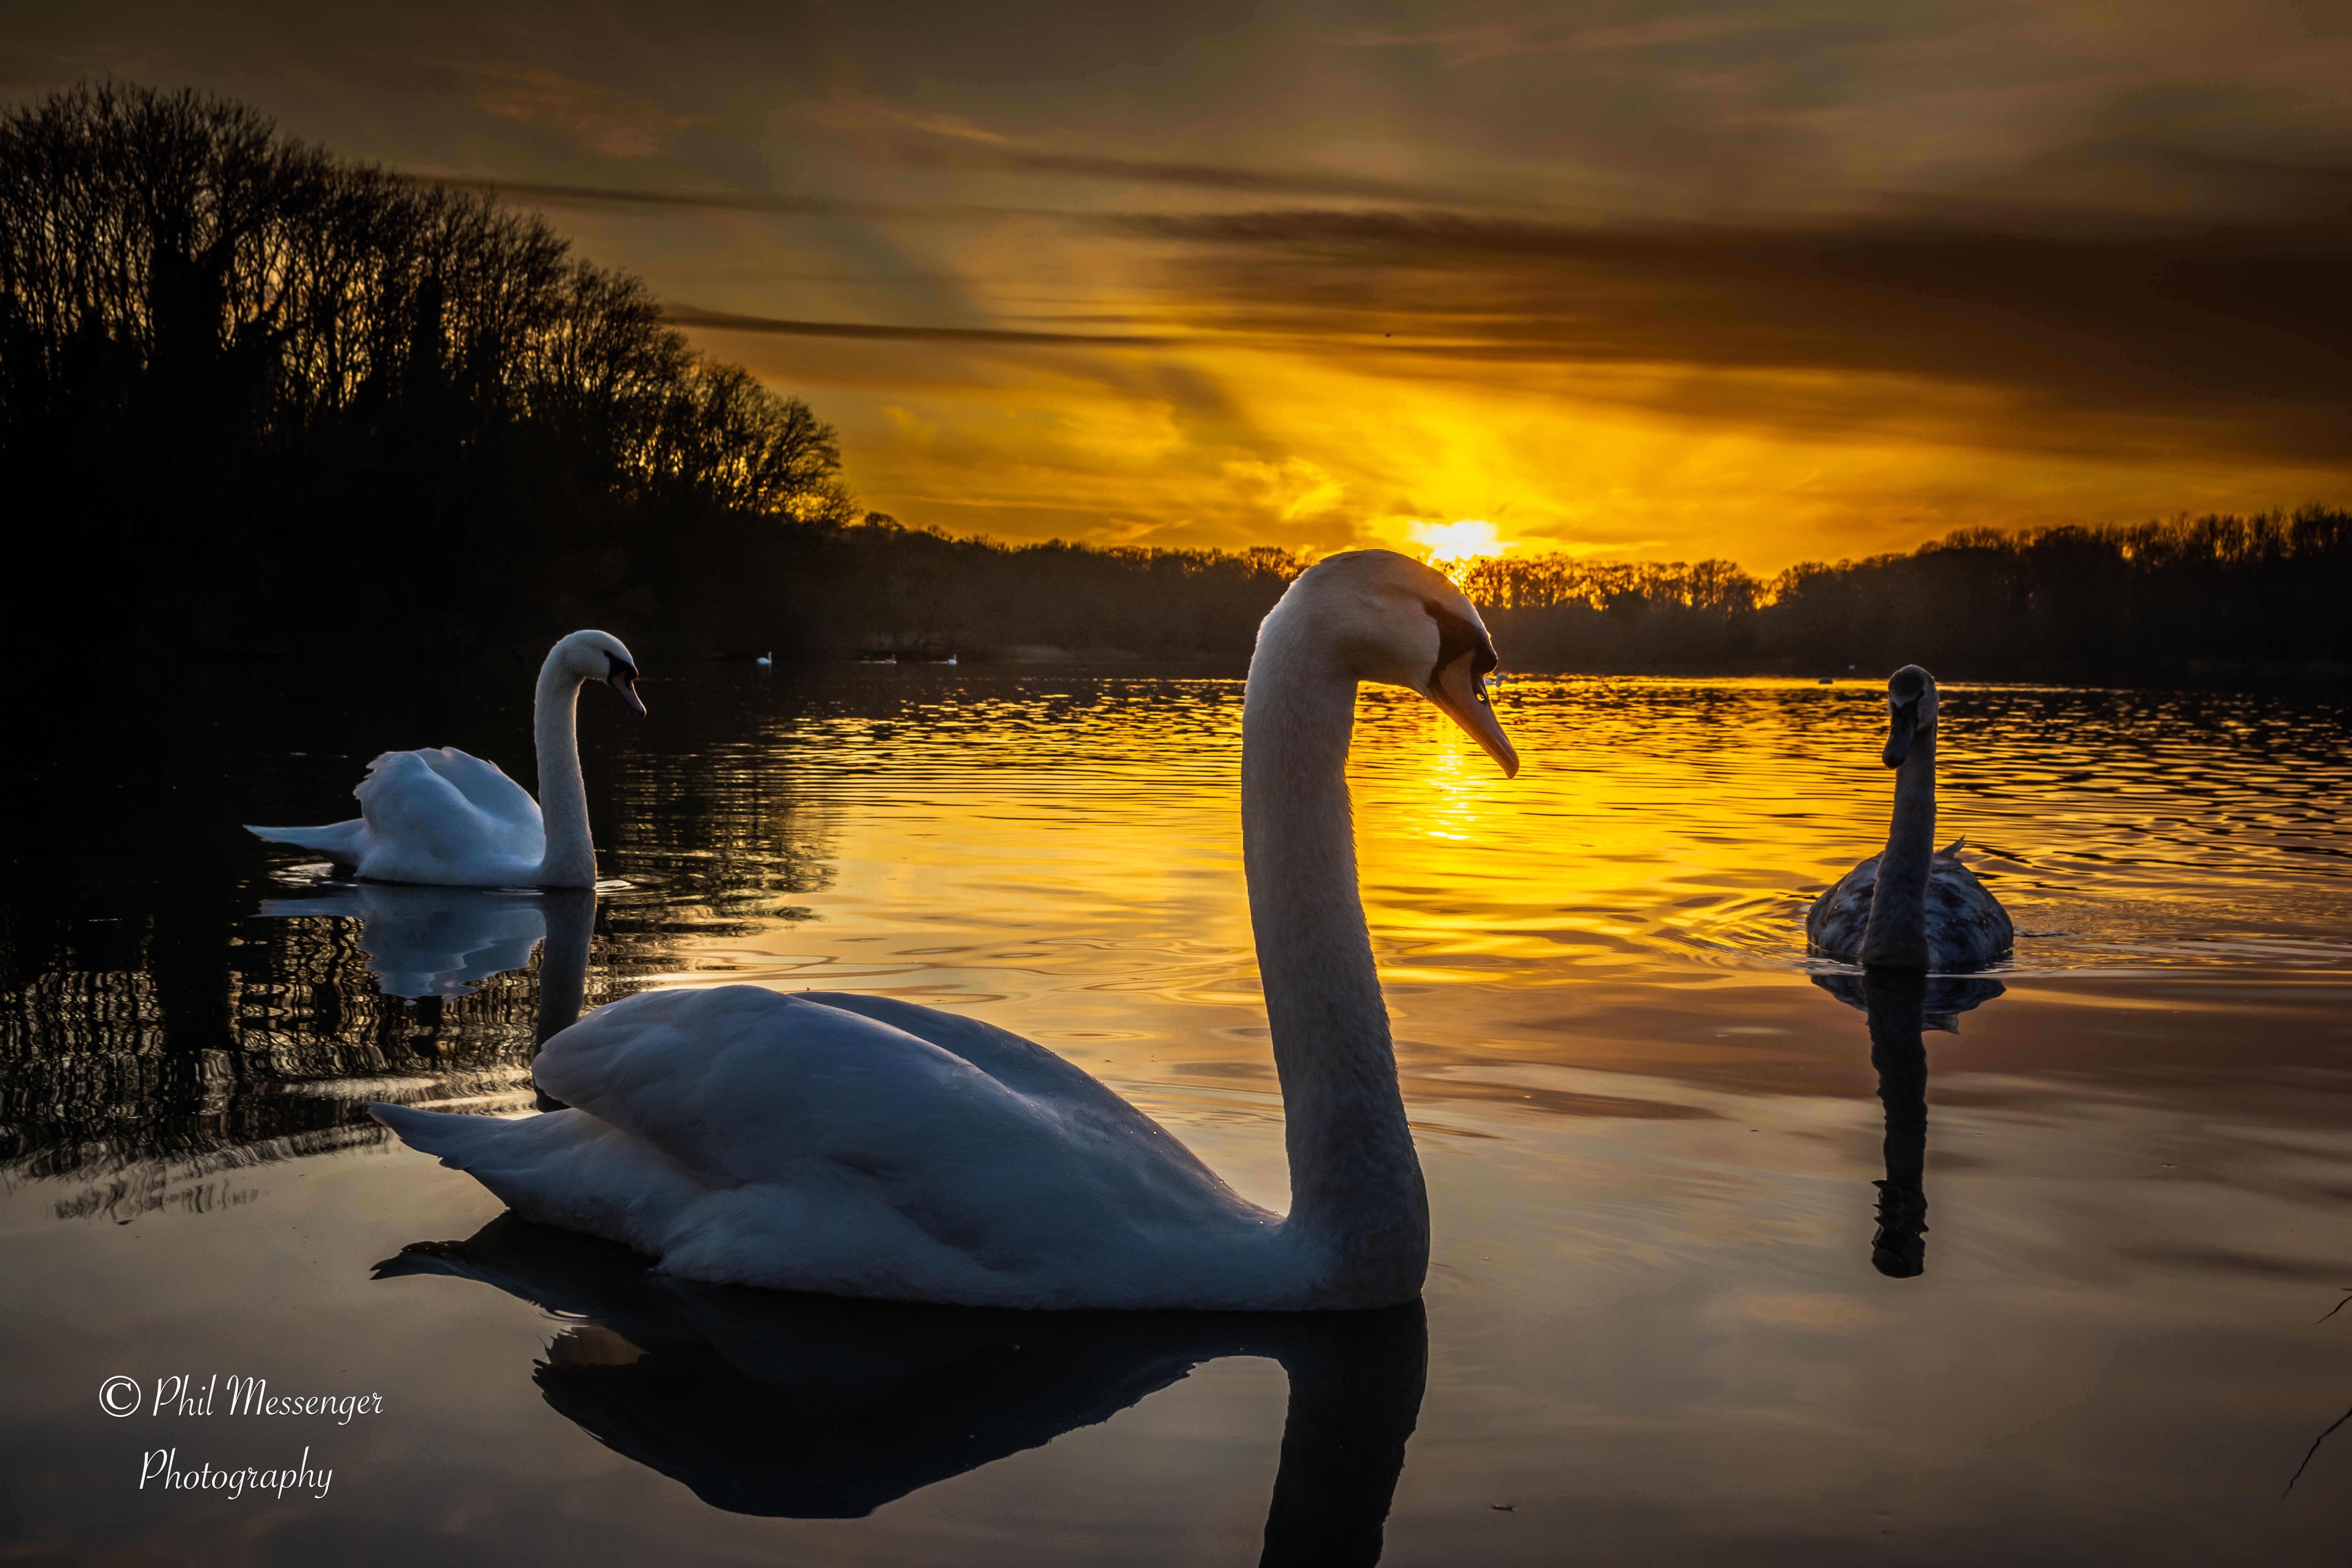 A swan shots as the sun was setting at Coate Water, Swindon today